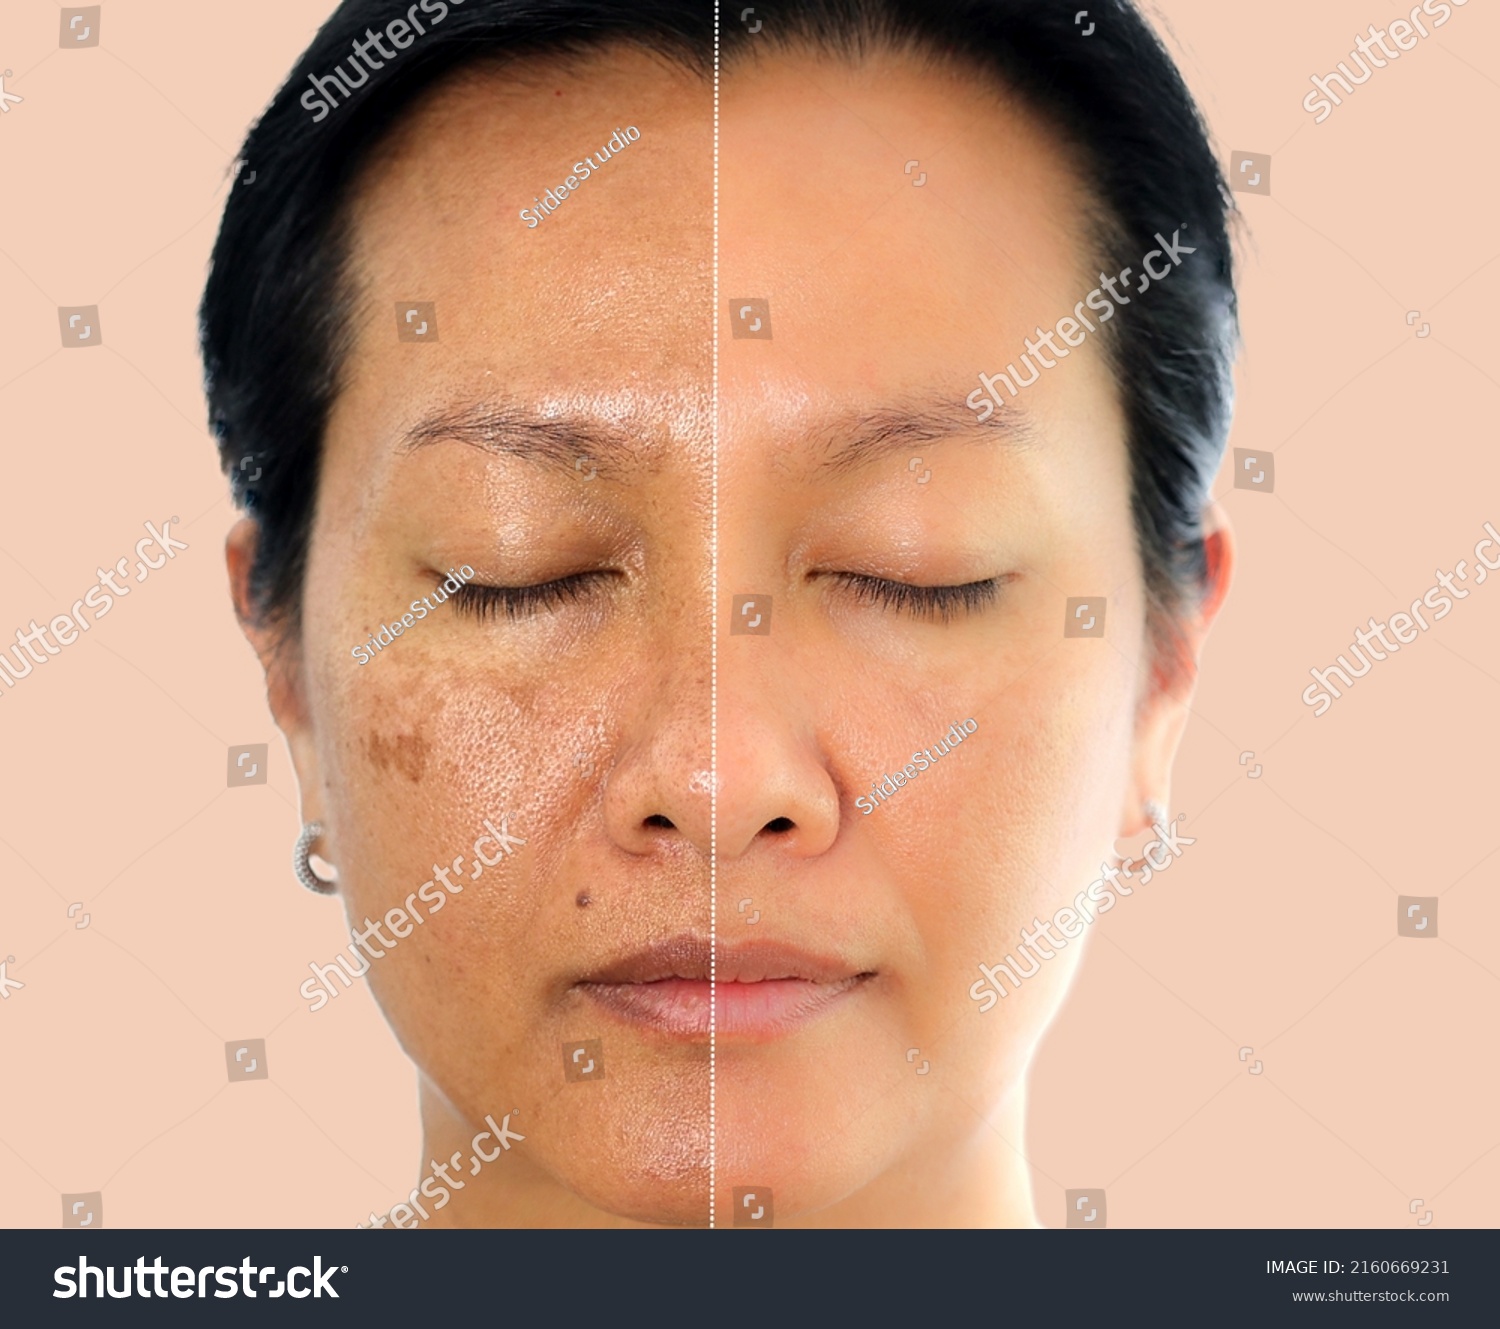 Retouched image before and after spot melasma pigmentation facial treatment on middle age asian woman face. Skincare and health problem concept.  #2160669231